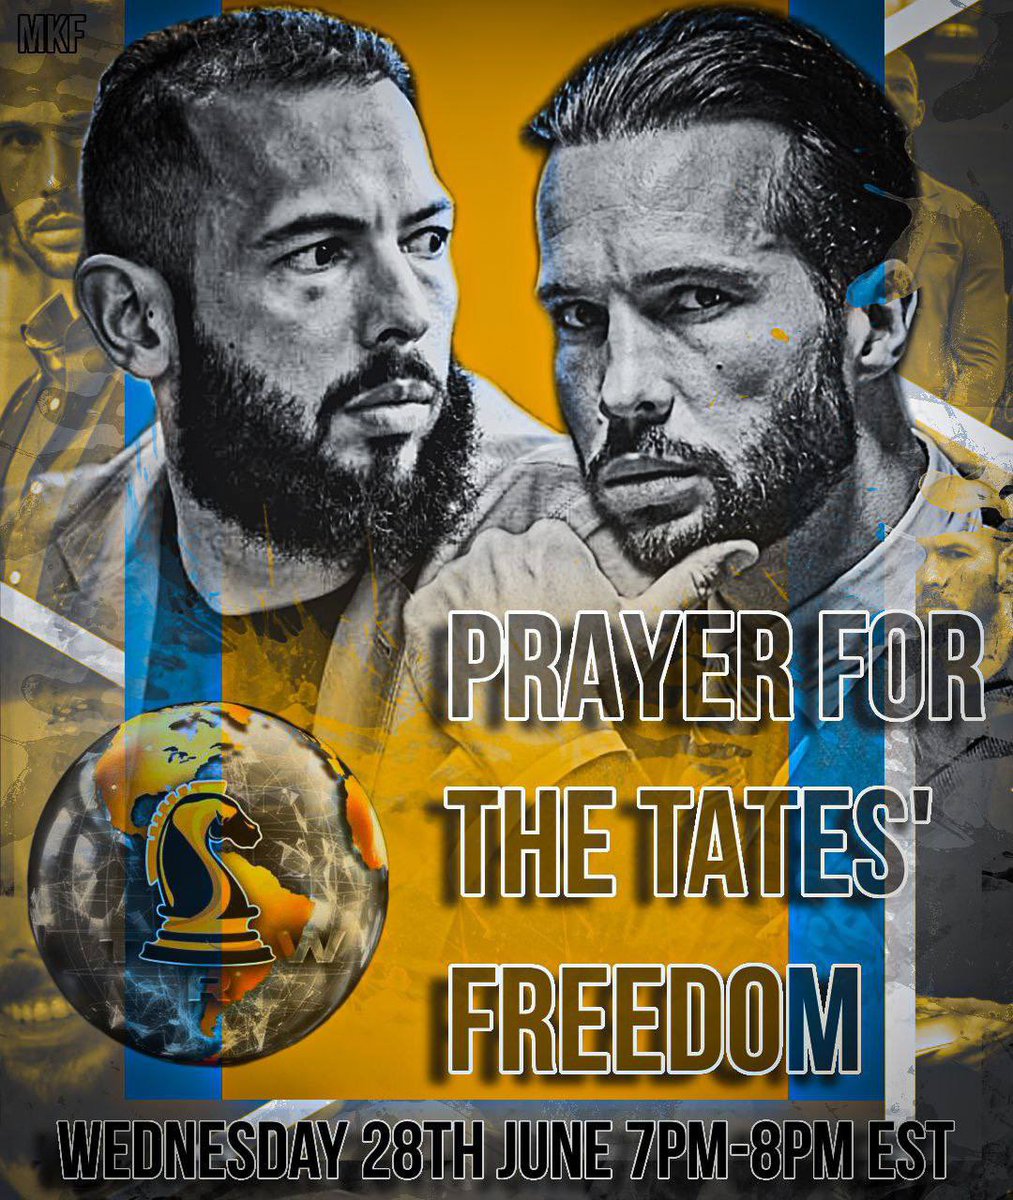 Hello everyone!
I have collaborated with @wilpujols to propose a global prayer initiative scheduled for the 28th of June, which precedes the court date of the Tate brothers. This significant date coincides with the holy Day of Arafah in Islam, known as a day of prayer and…